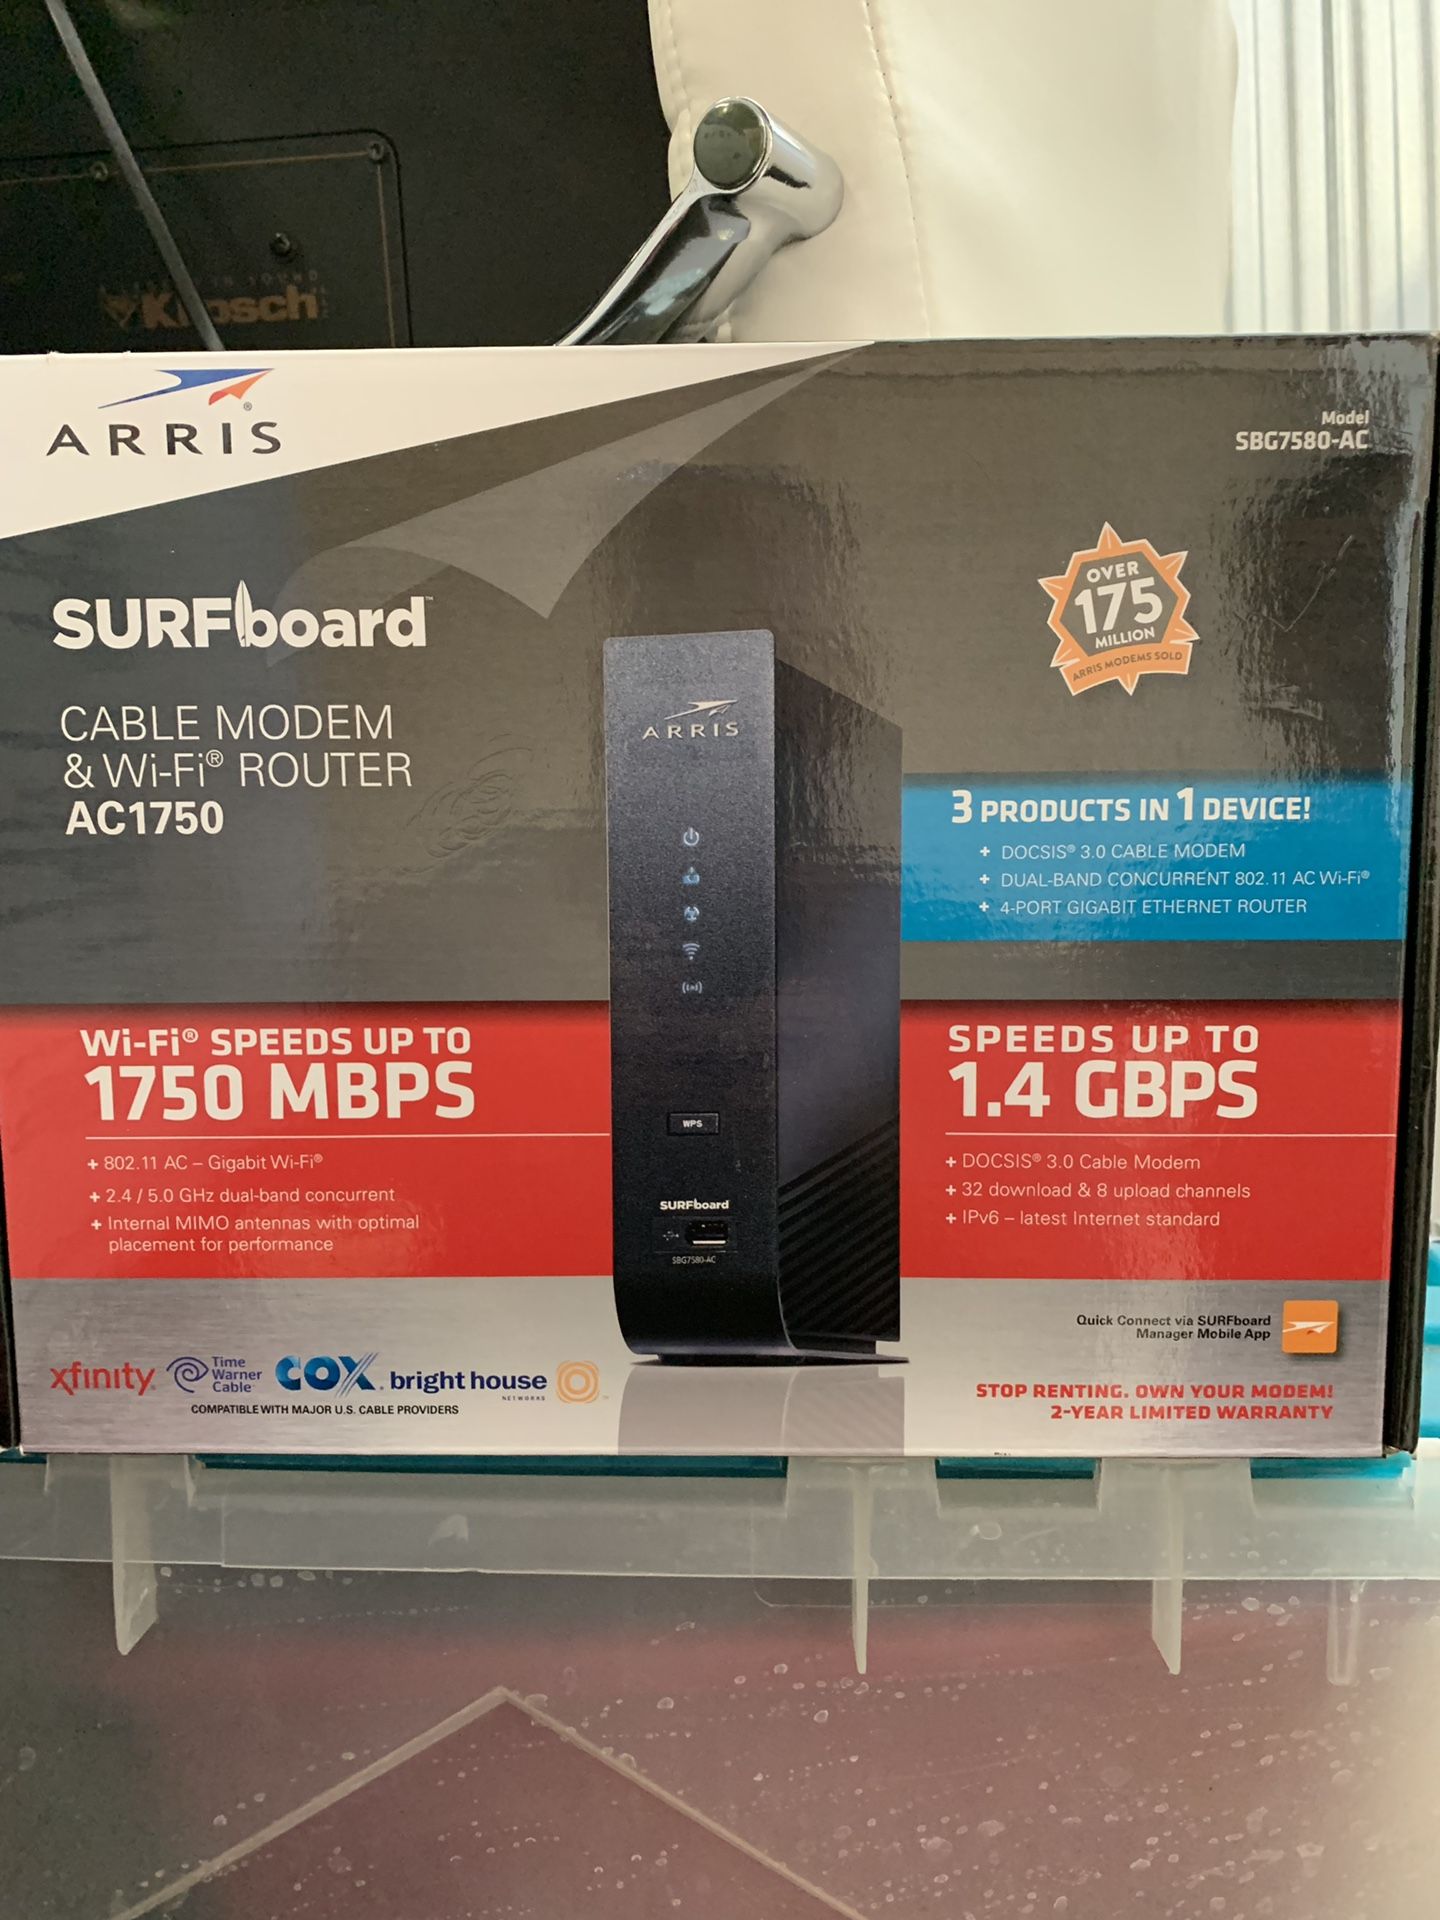 Arris Surfboard AC1750 Modem and Router